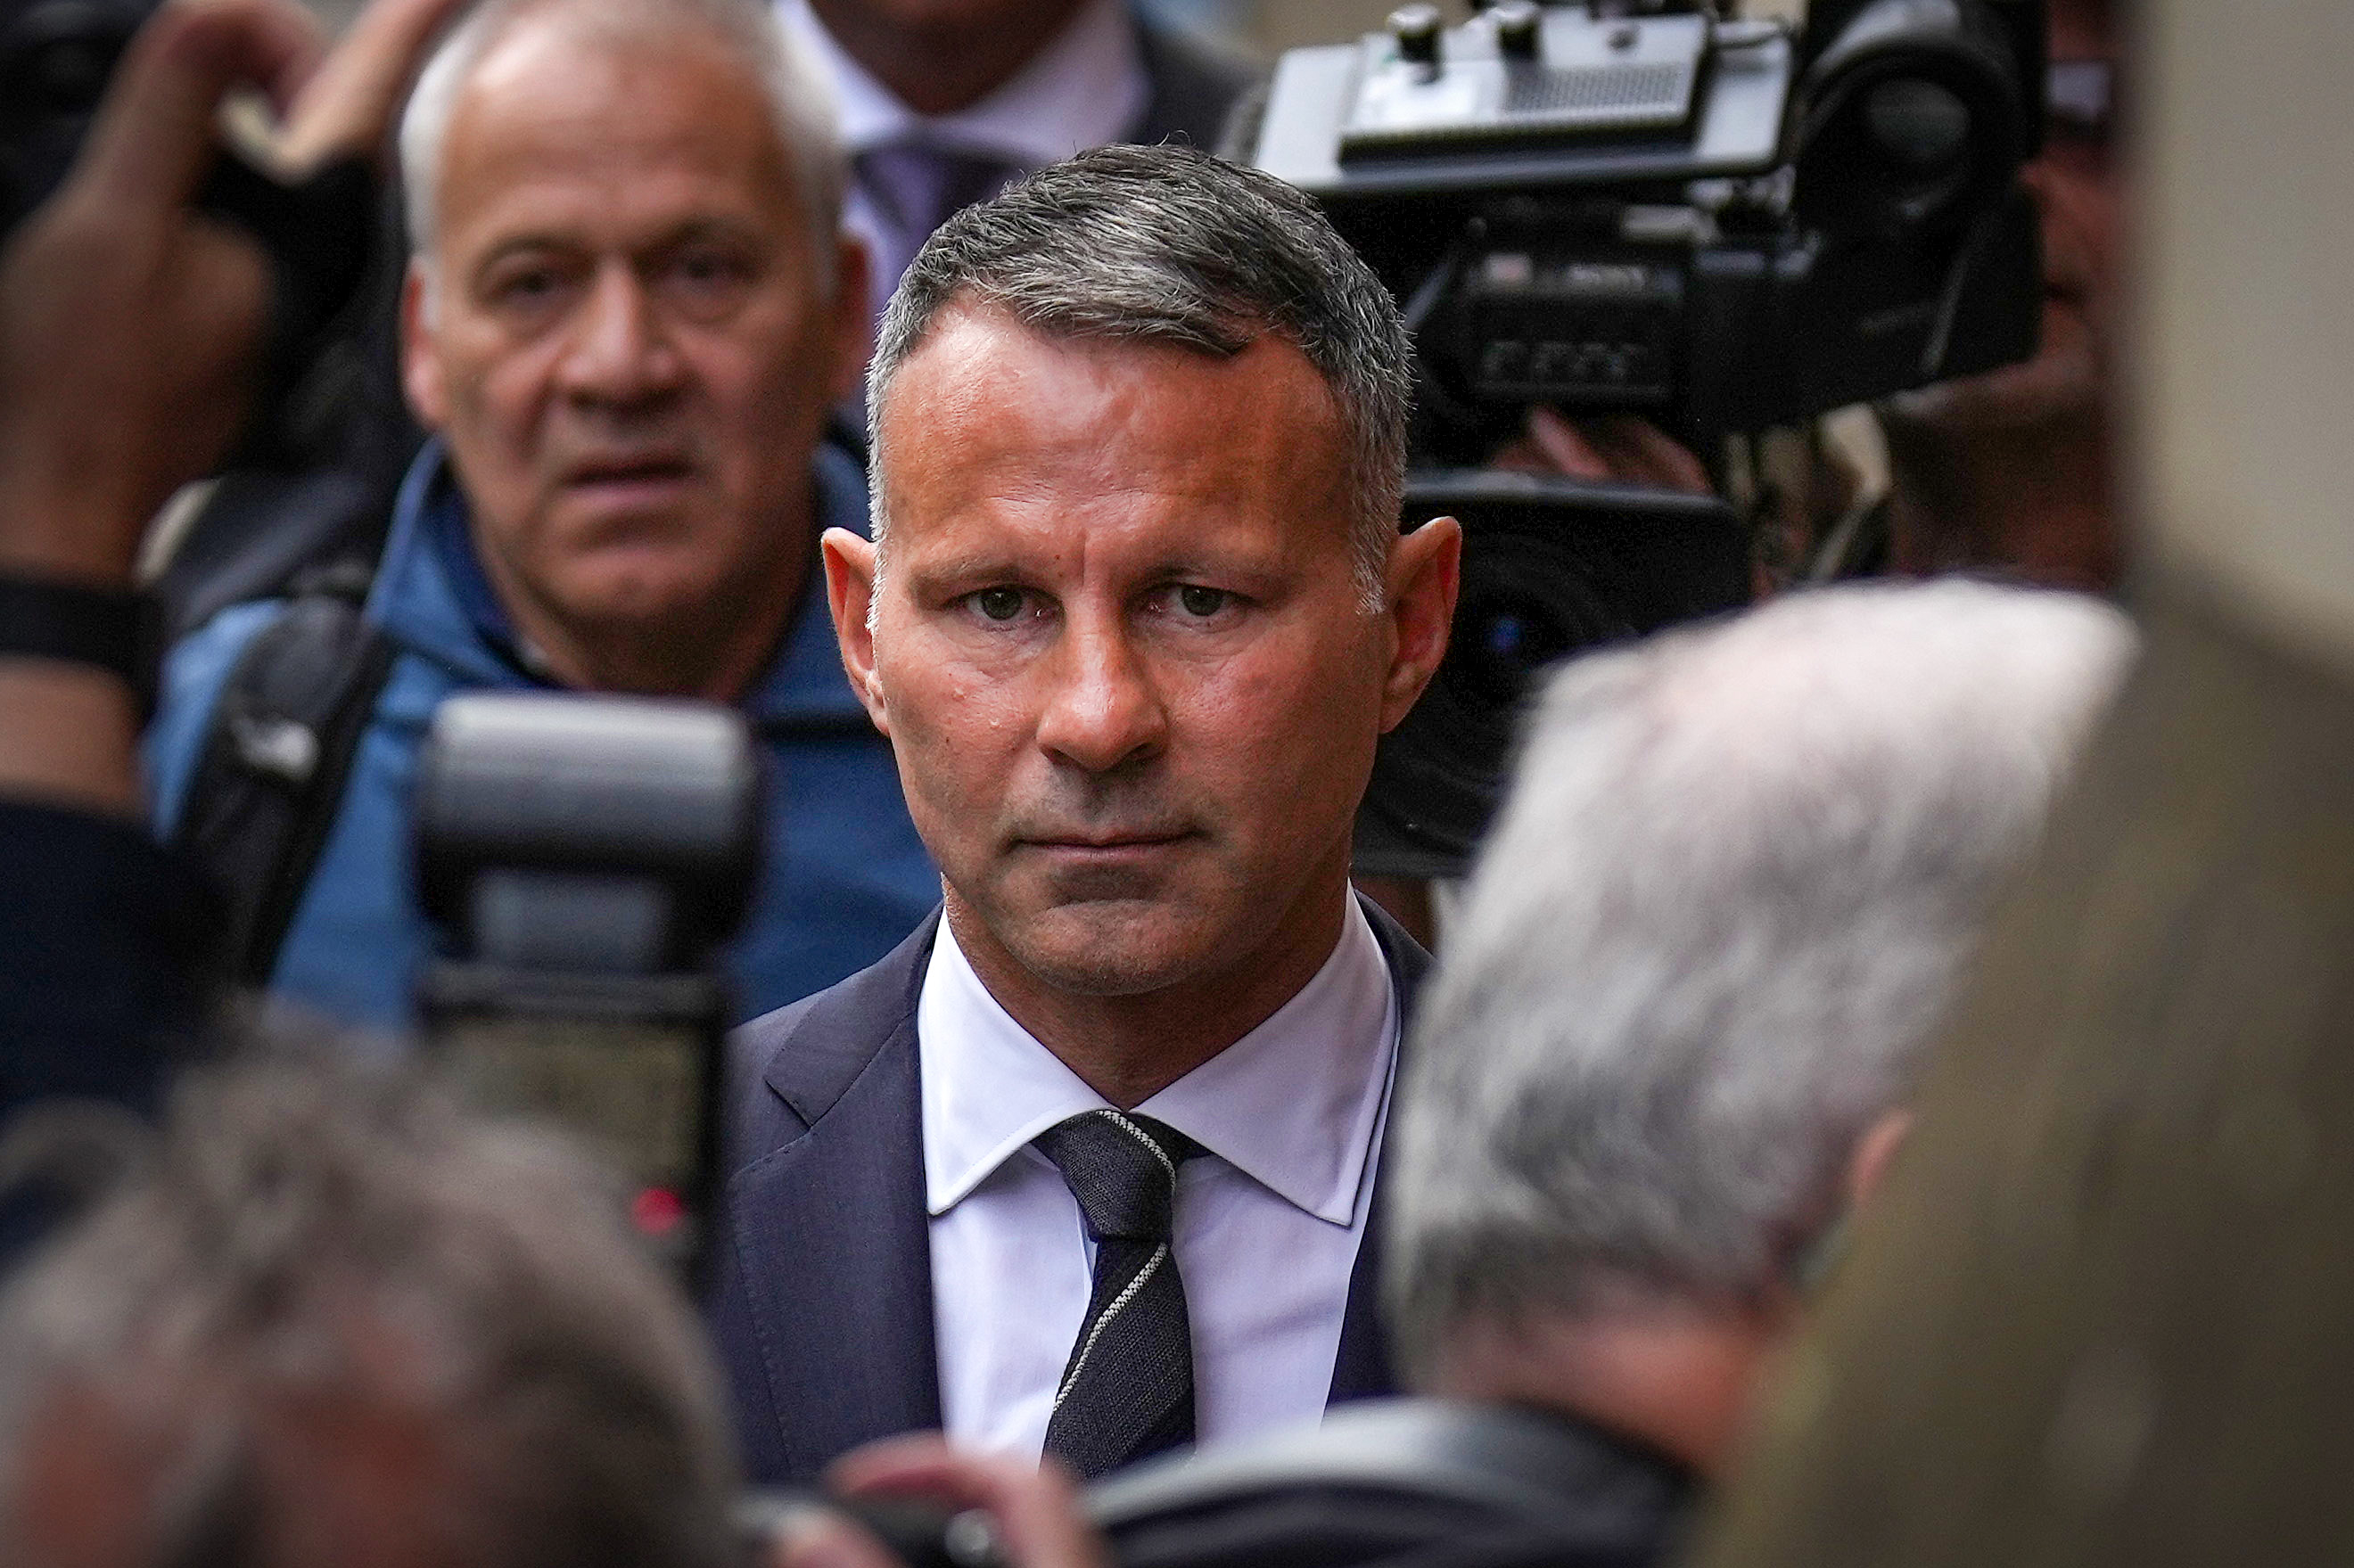 Ryan Giggs Faces Trial On Charges Of Assault And Coercive Behaviour